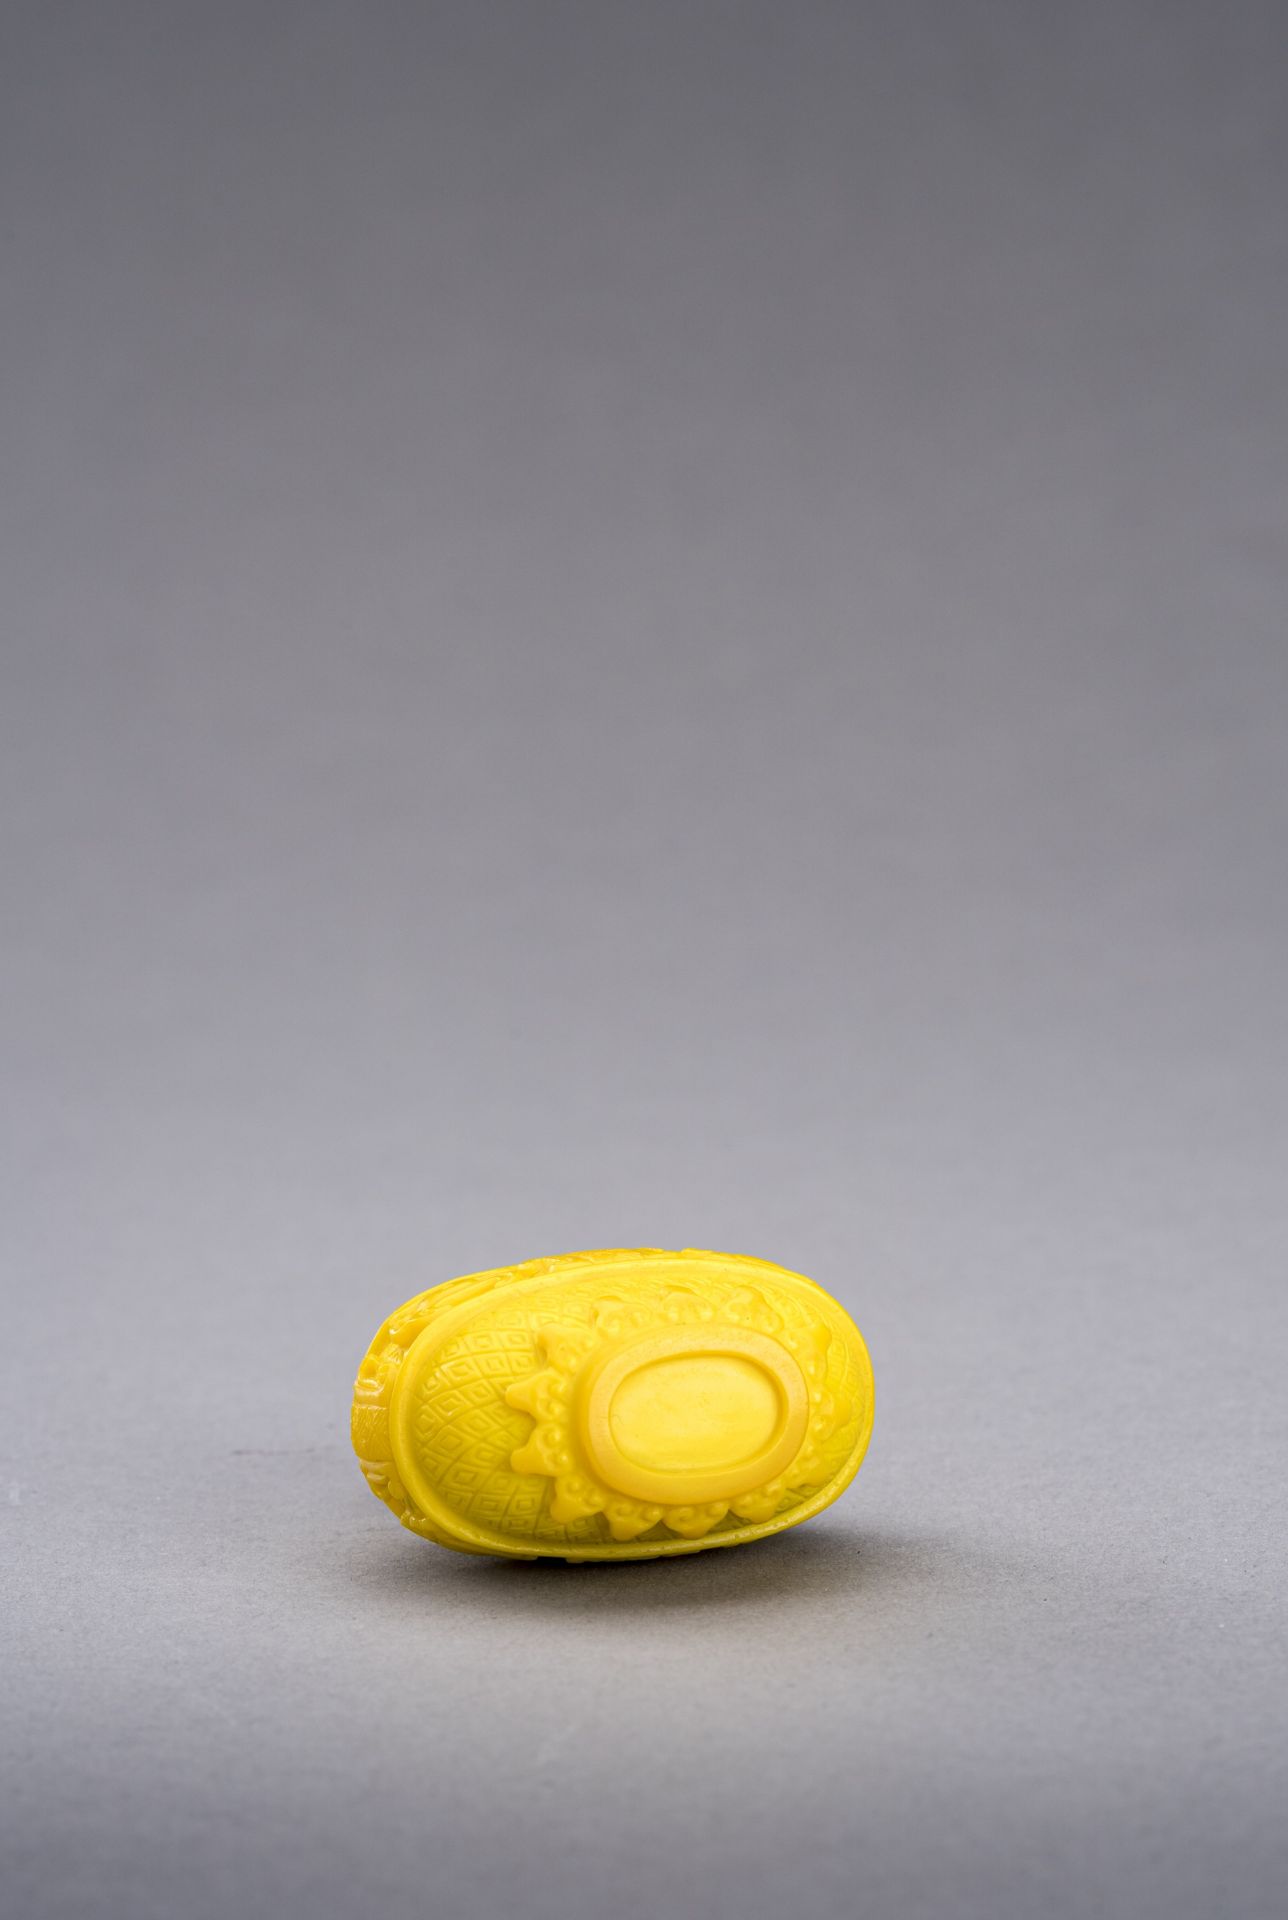 AN ARCHAISTIC YELLOW GLASS SNUFF BOTTLE, c. 1920s - Image 6 of 6